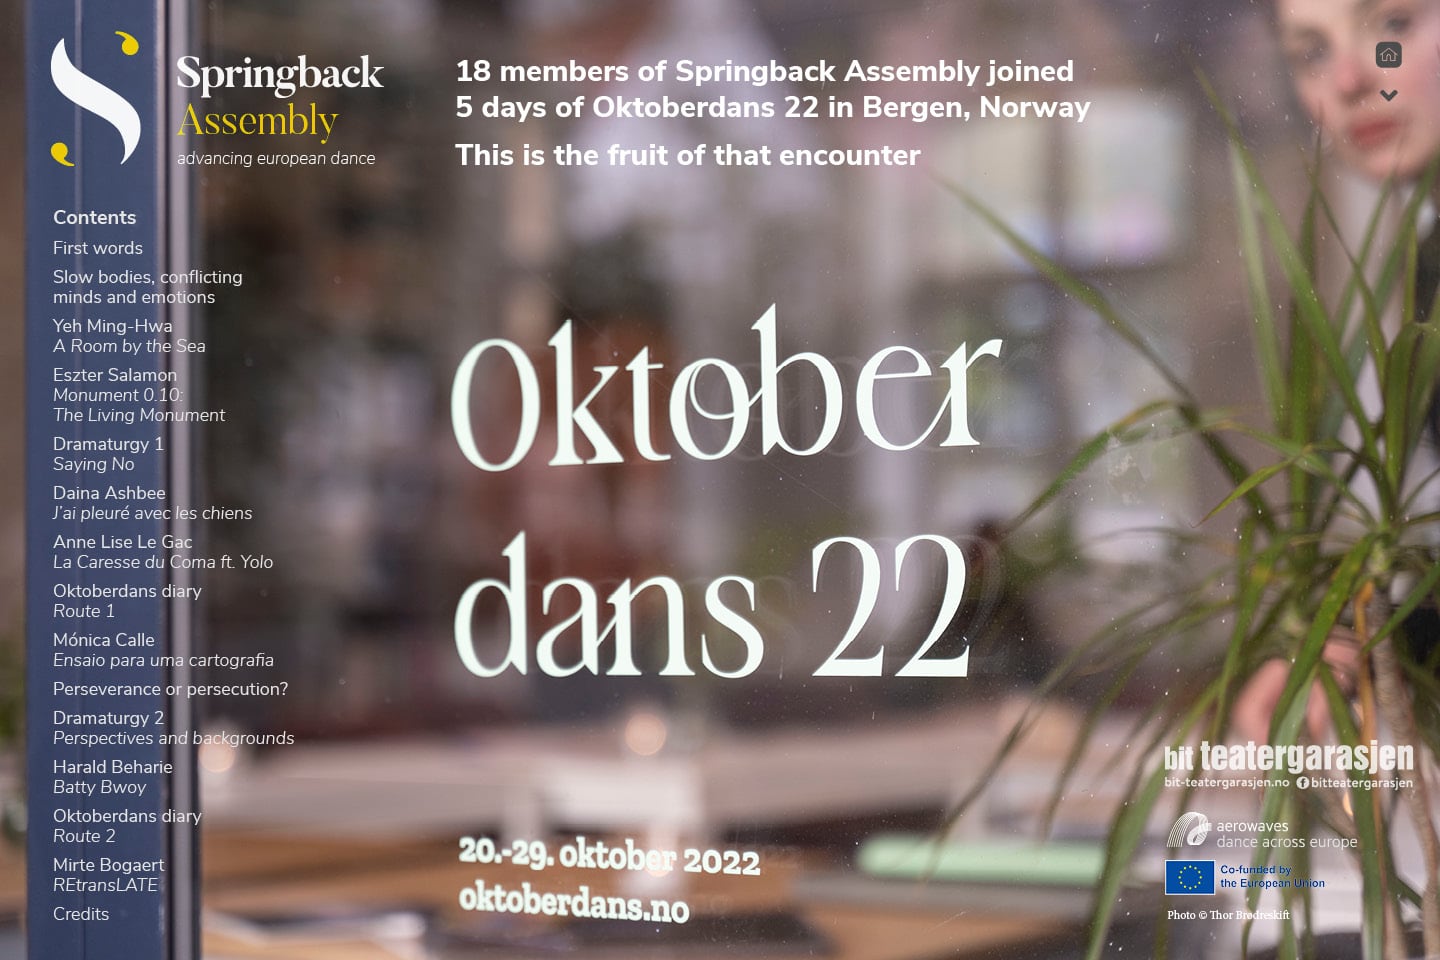 Cover image for Springback Assembly encounter at Oktoberdans 22 in Bergen, Norway